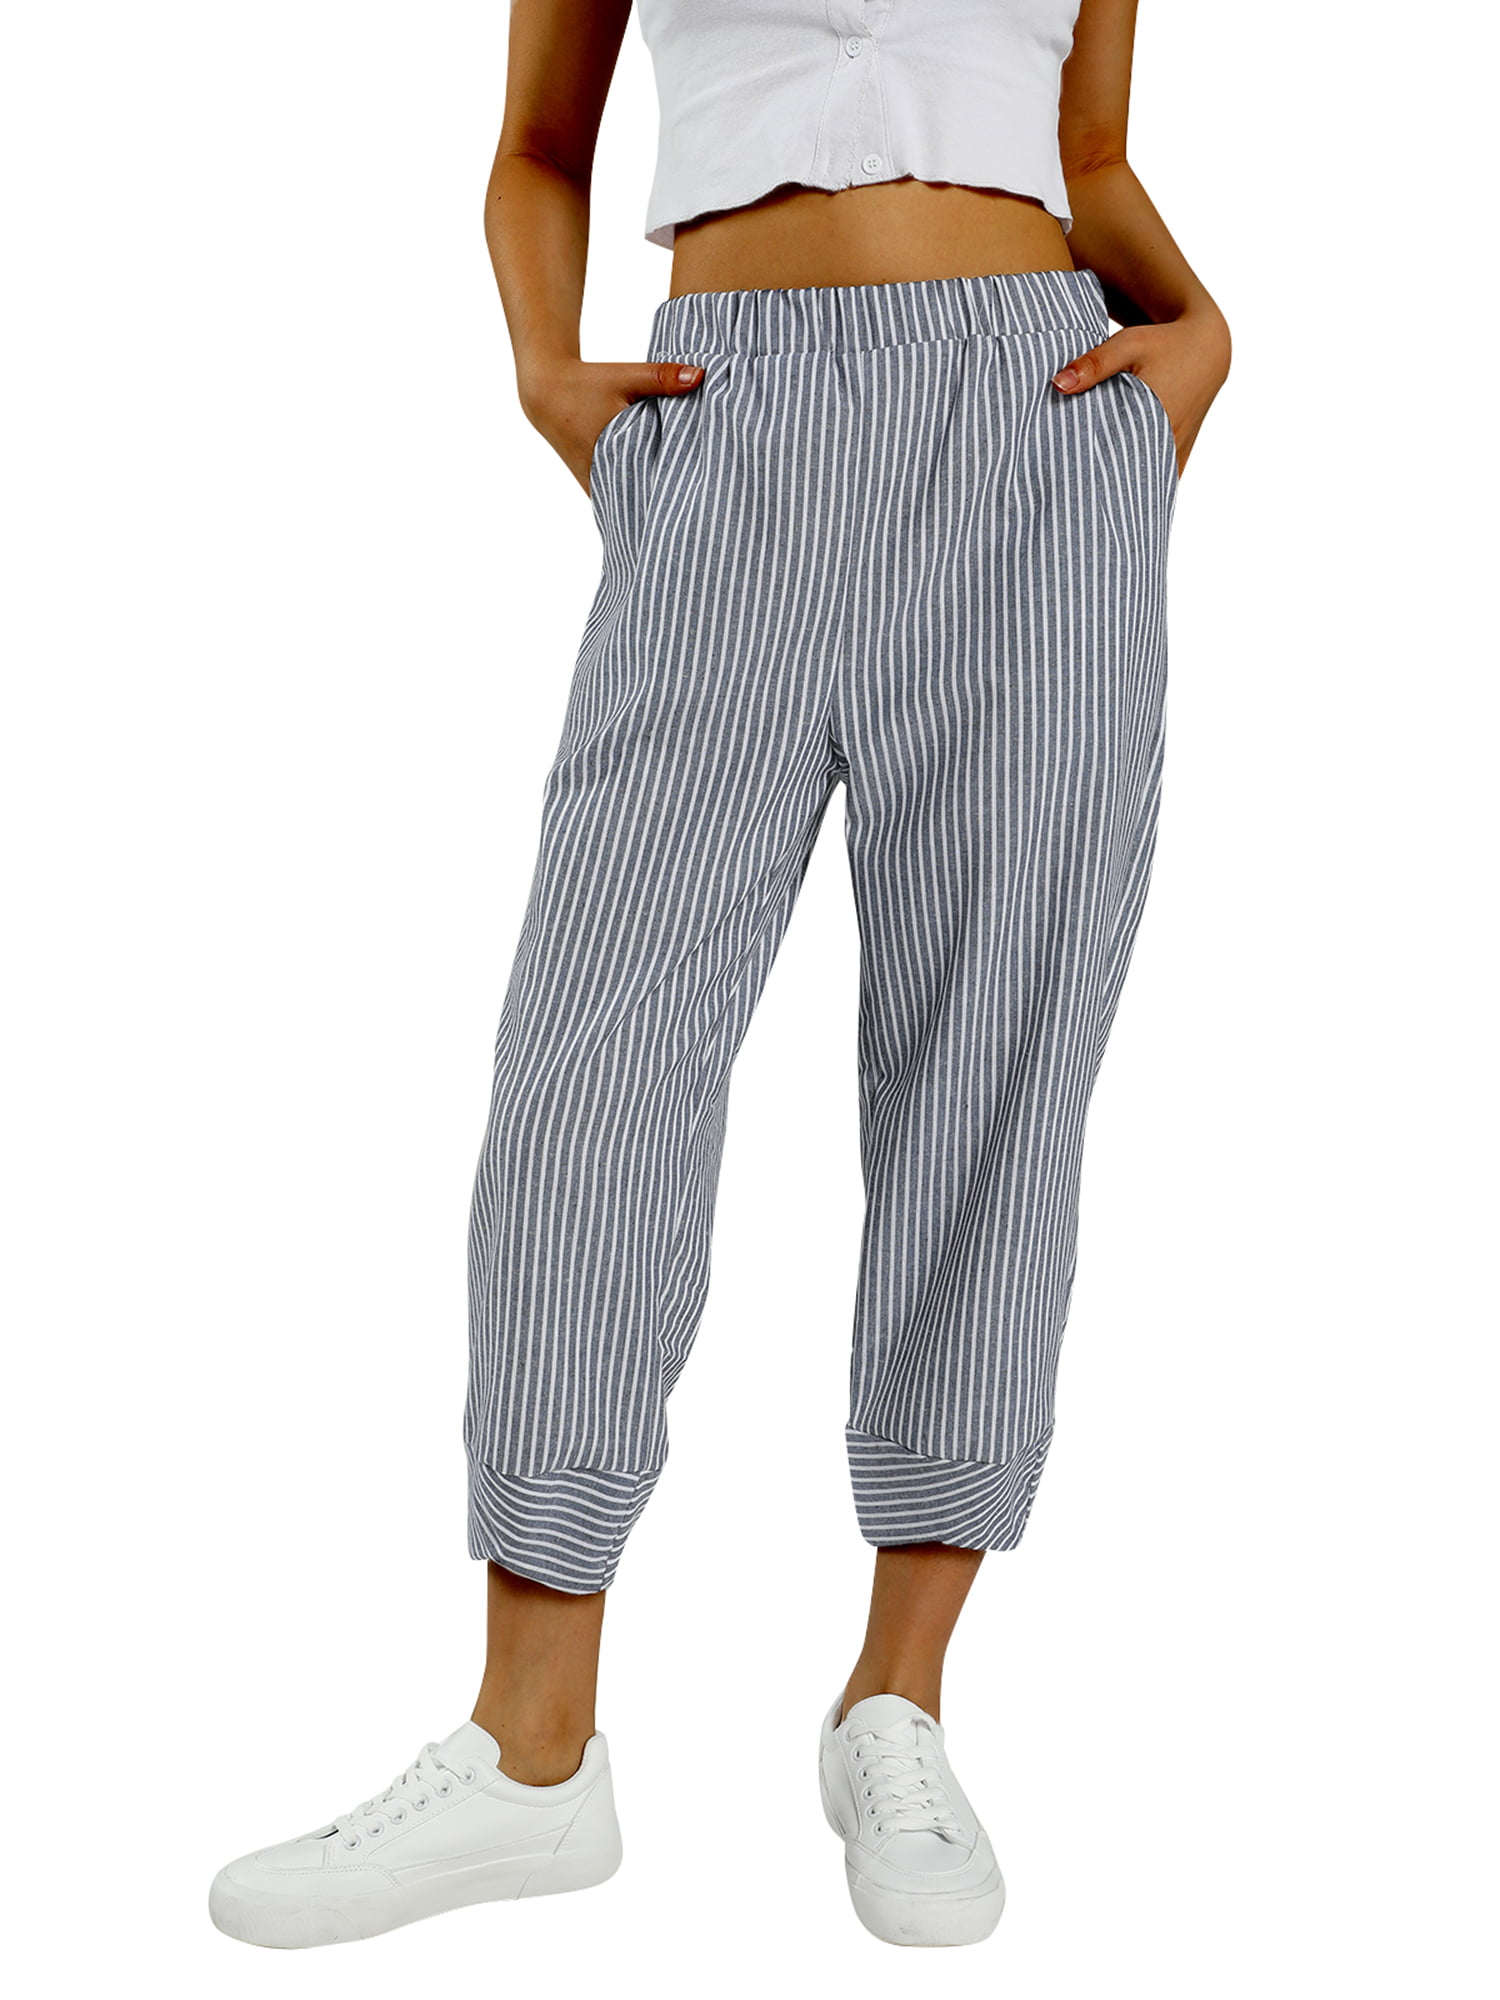 Wide Leg Pants For Women Casual Summer Linen Aesthetic Graphic Elastic Waist Loose Capris Crop With Pockets Beach Trousers 